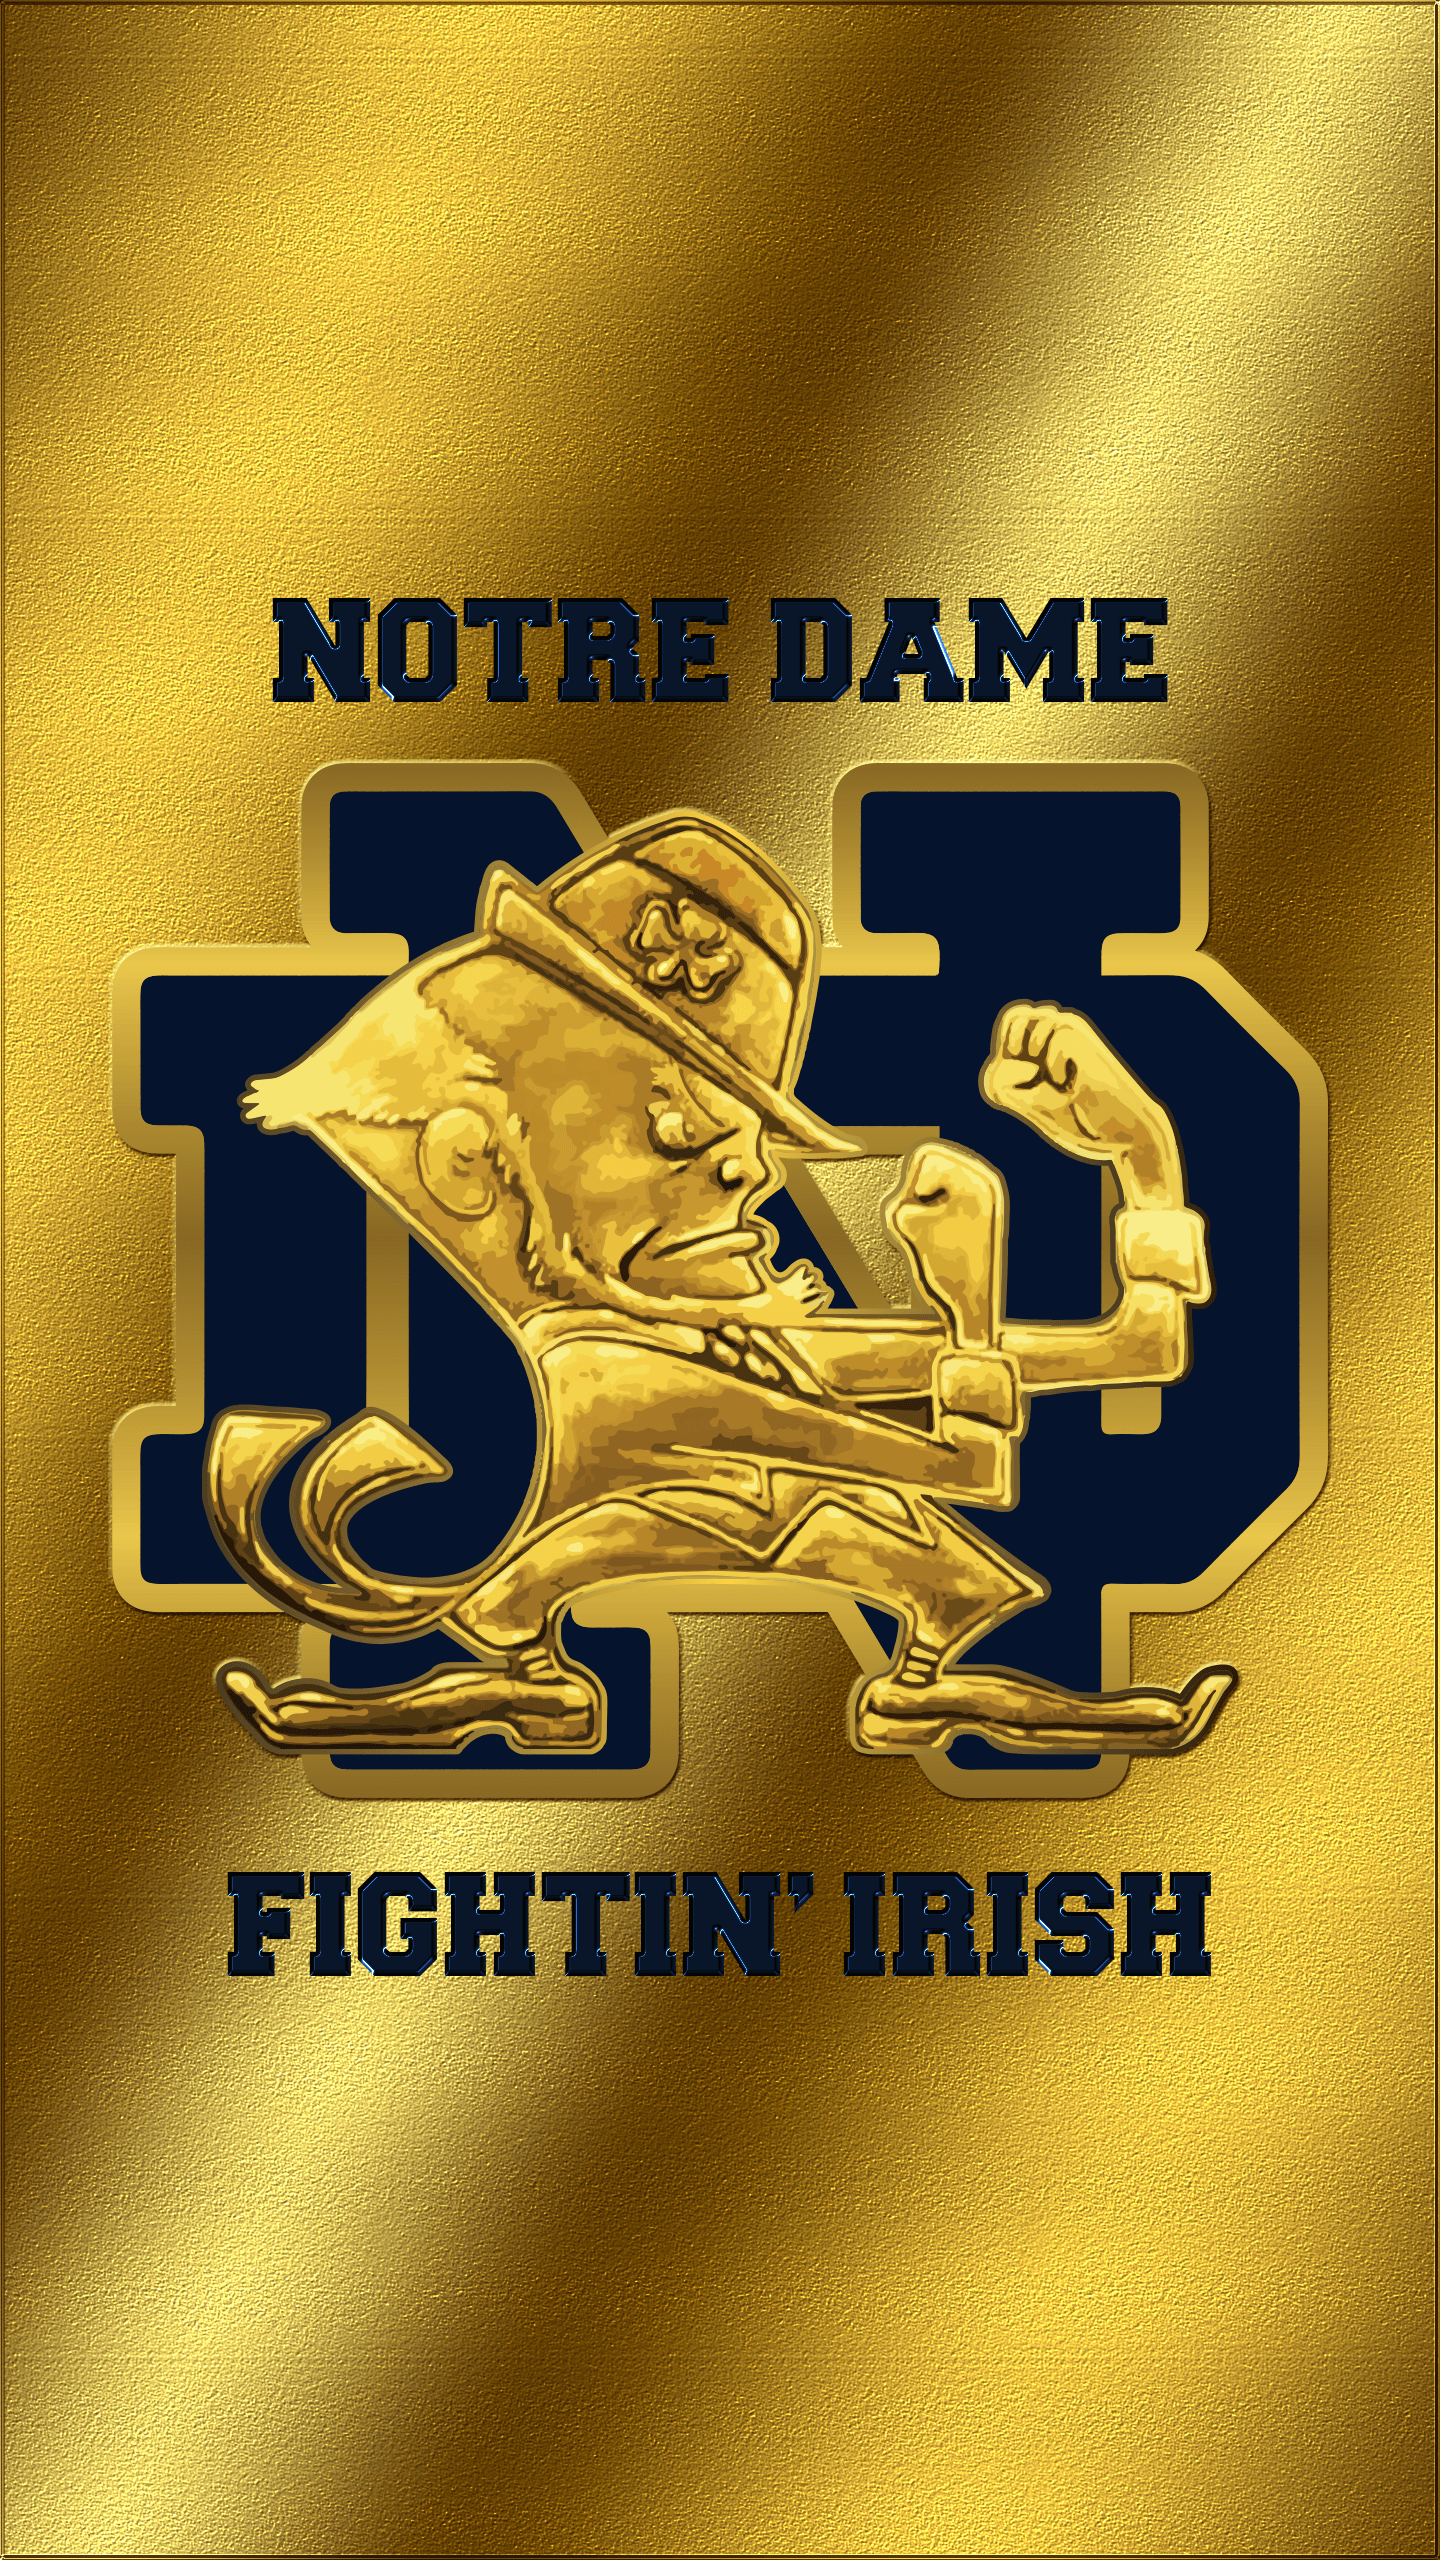 Notre Dame IPhone Android Wallpaper For Your Smart Phone. Save